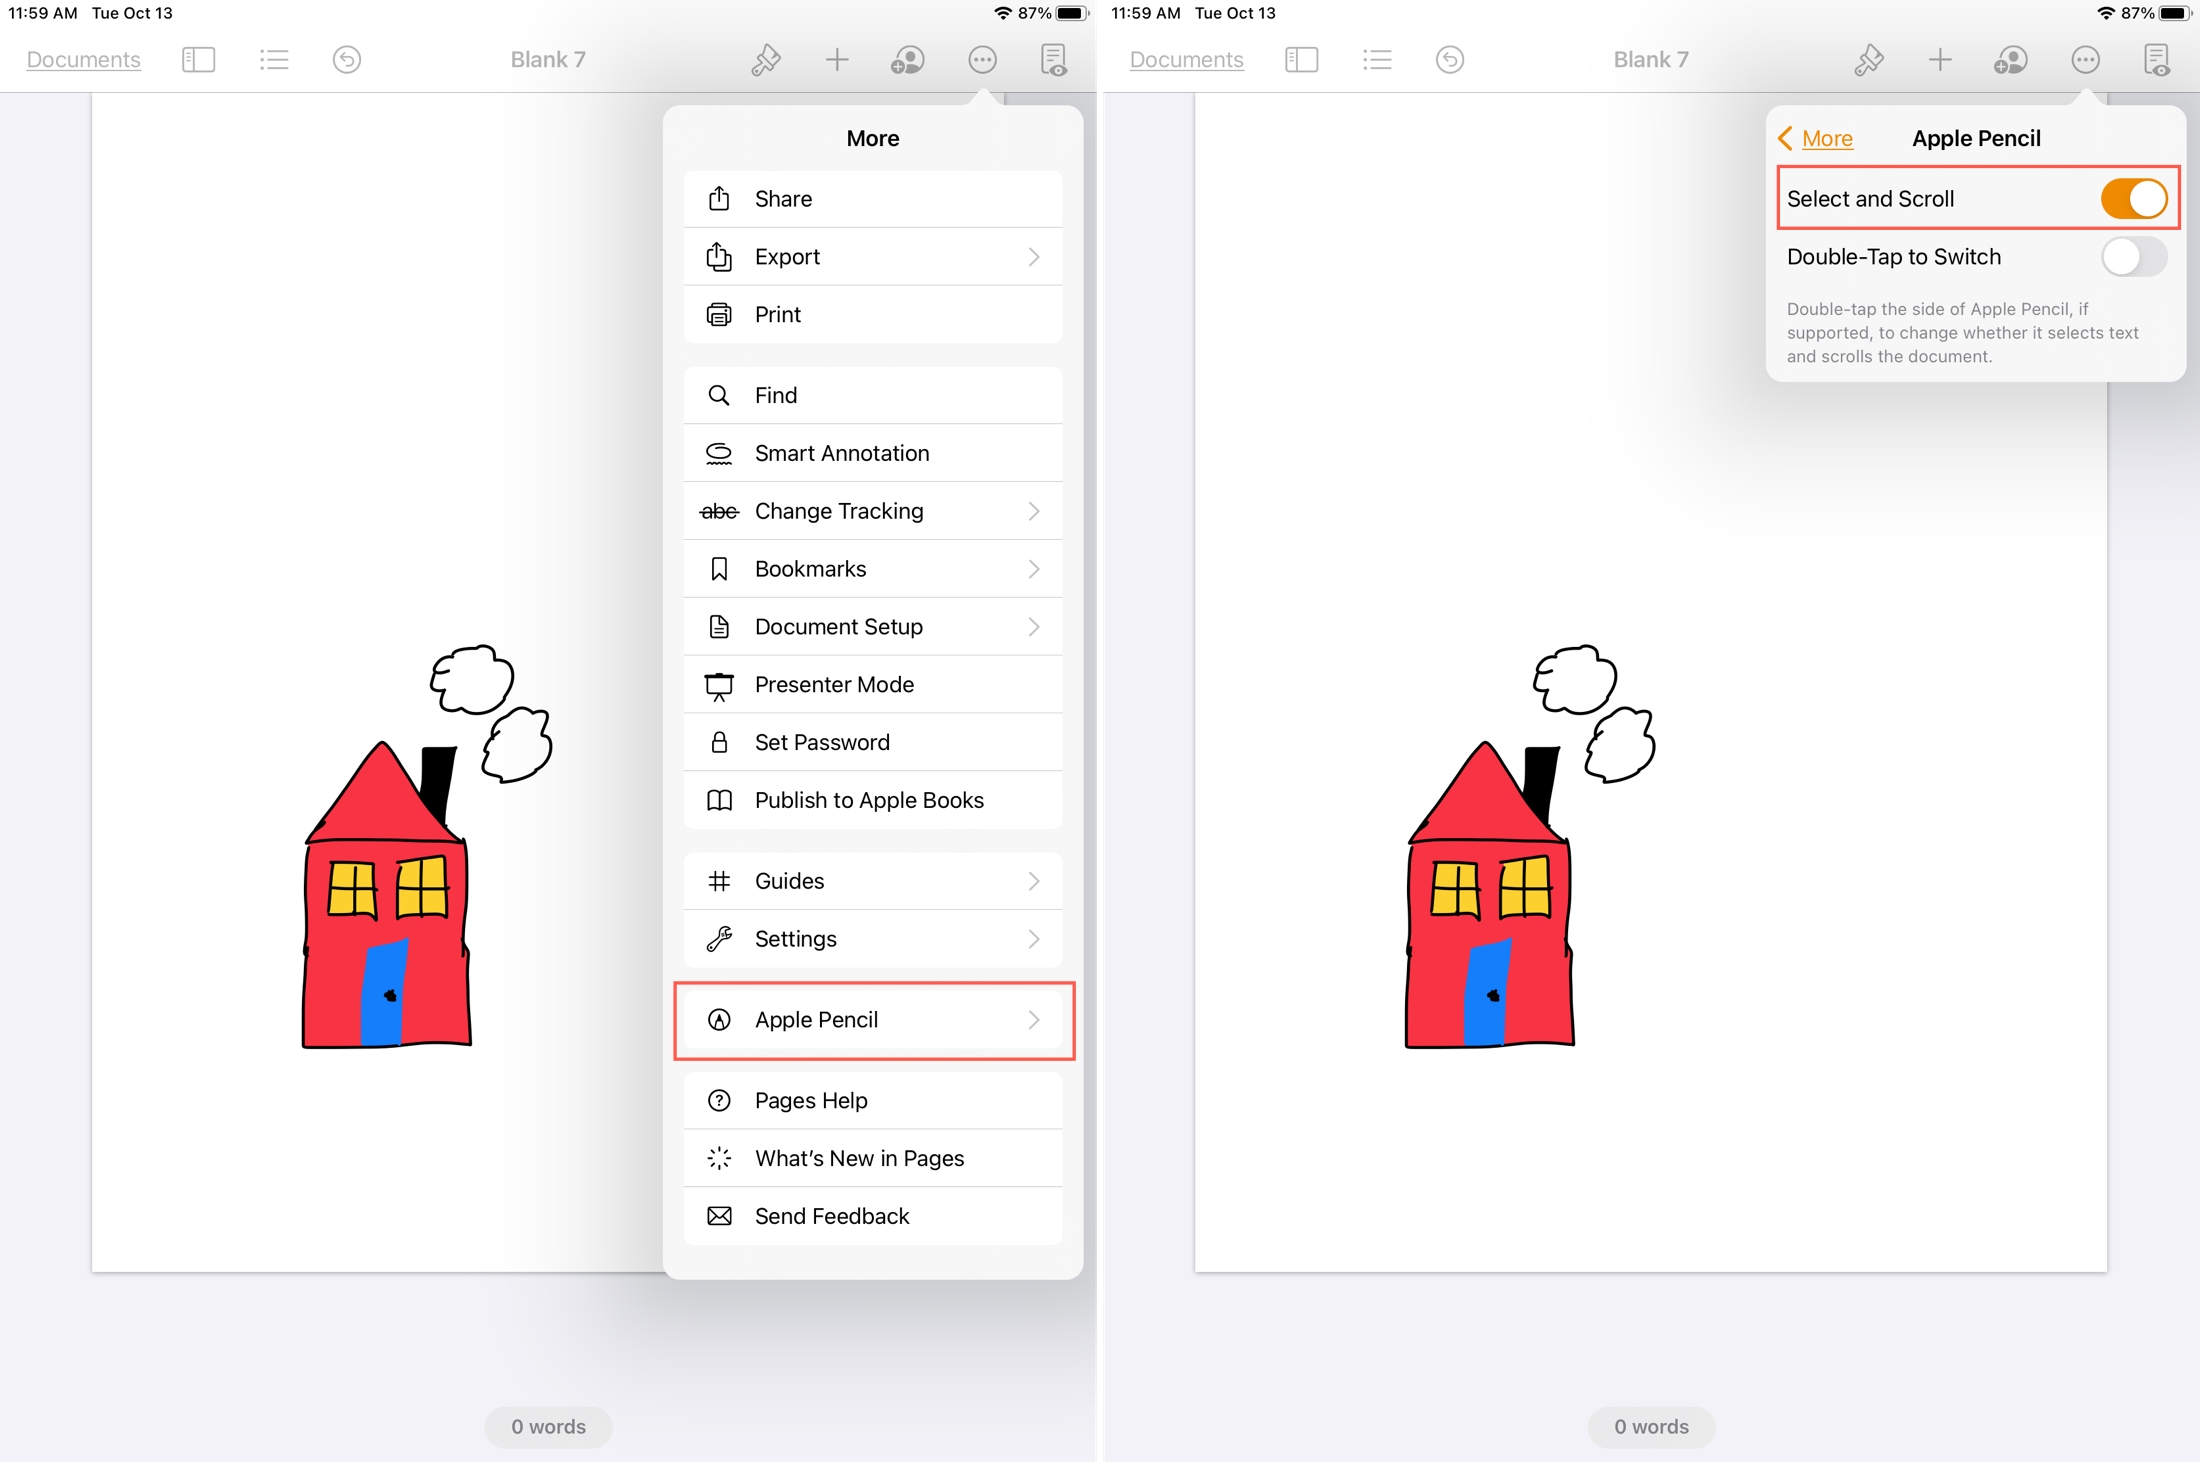 Apple Pencil Select and Scroll in Pages on iPad